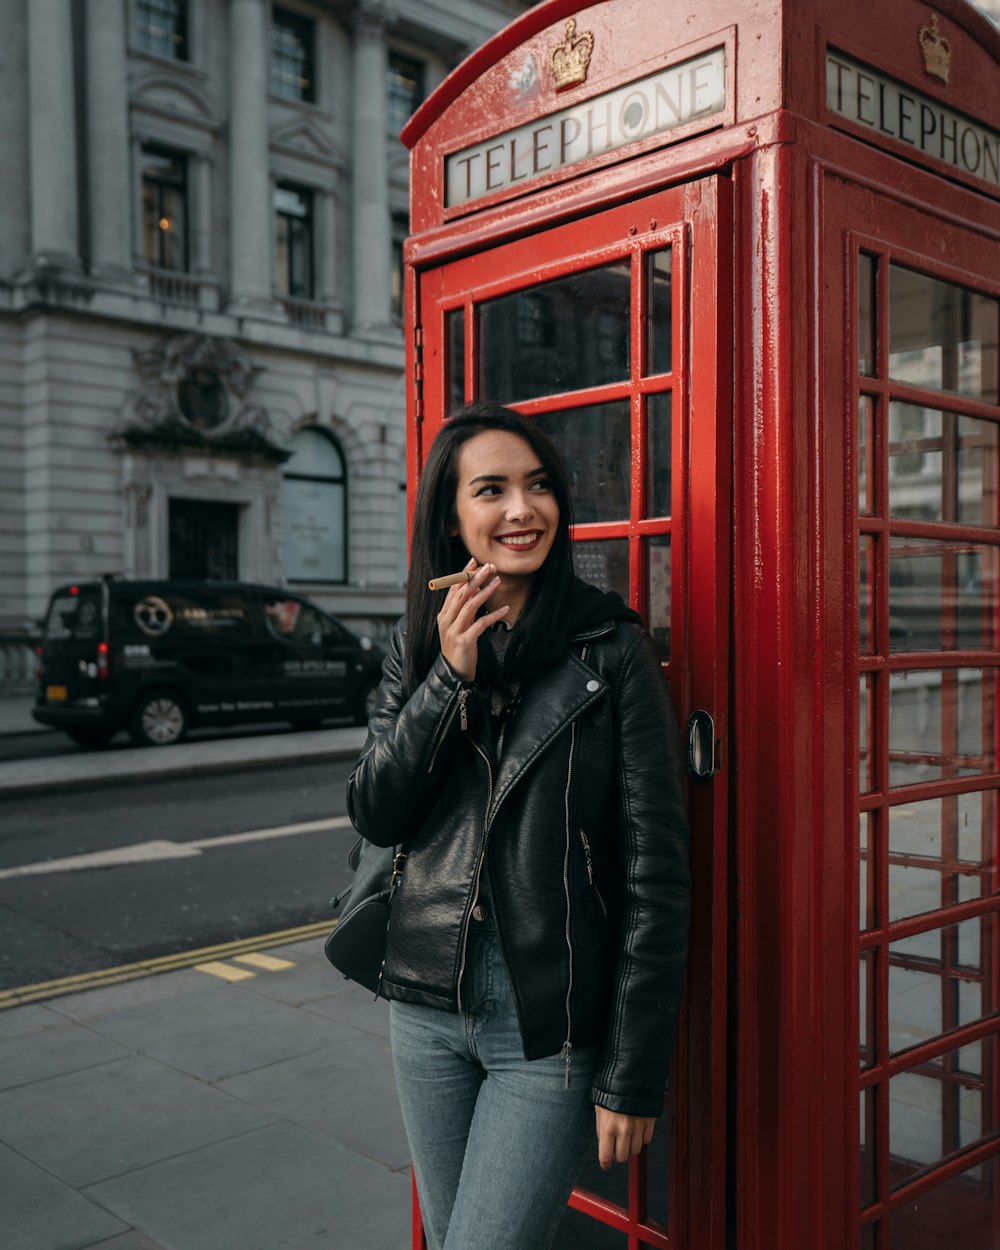 woman in black leather jacket standing near red telephone booth